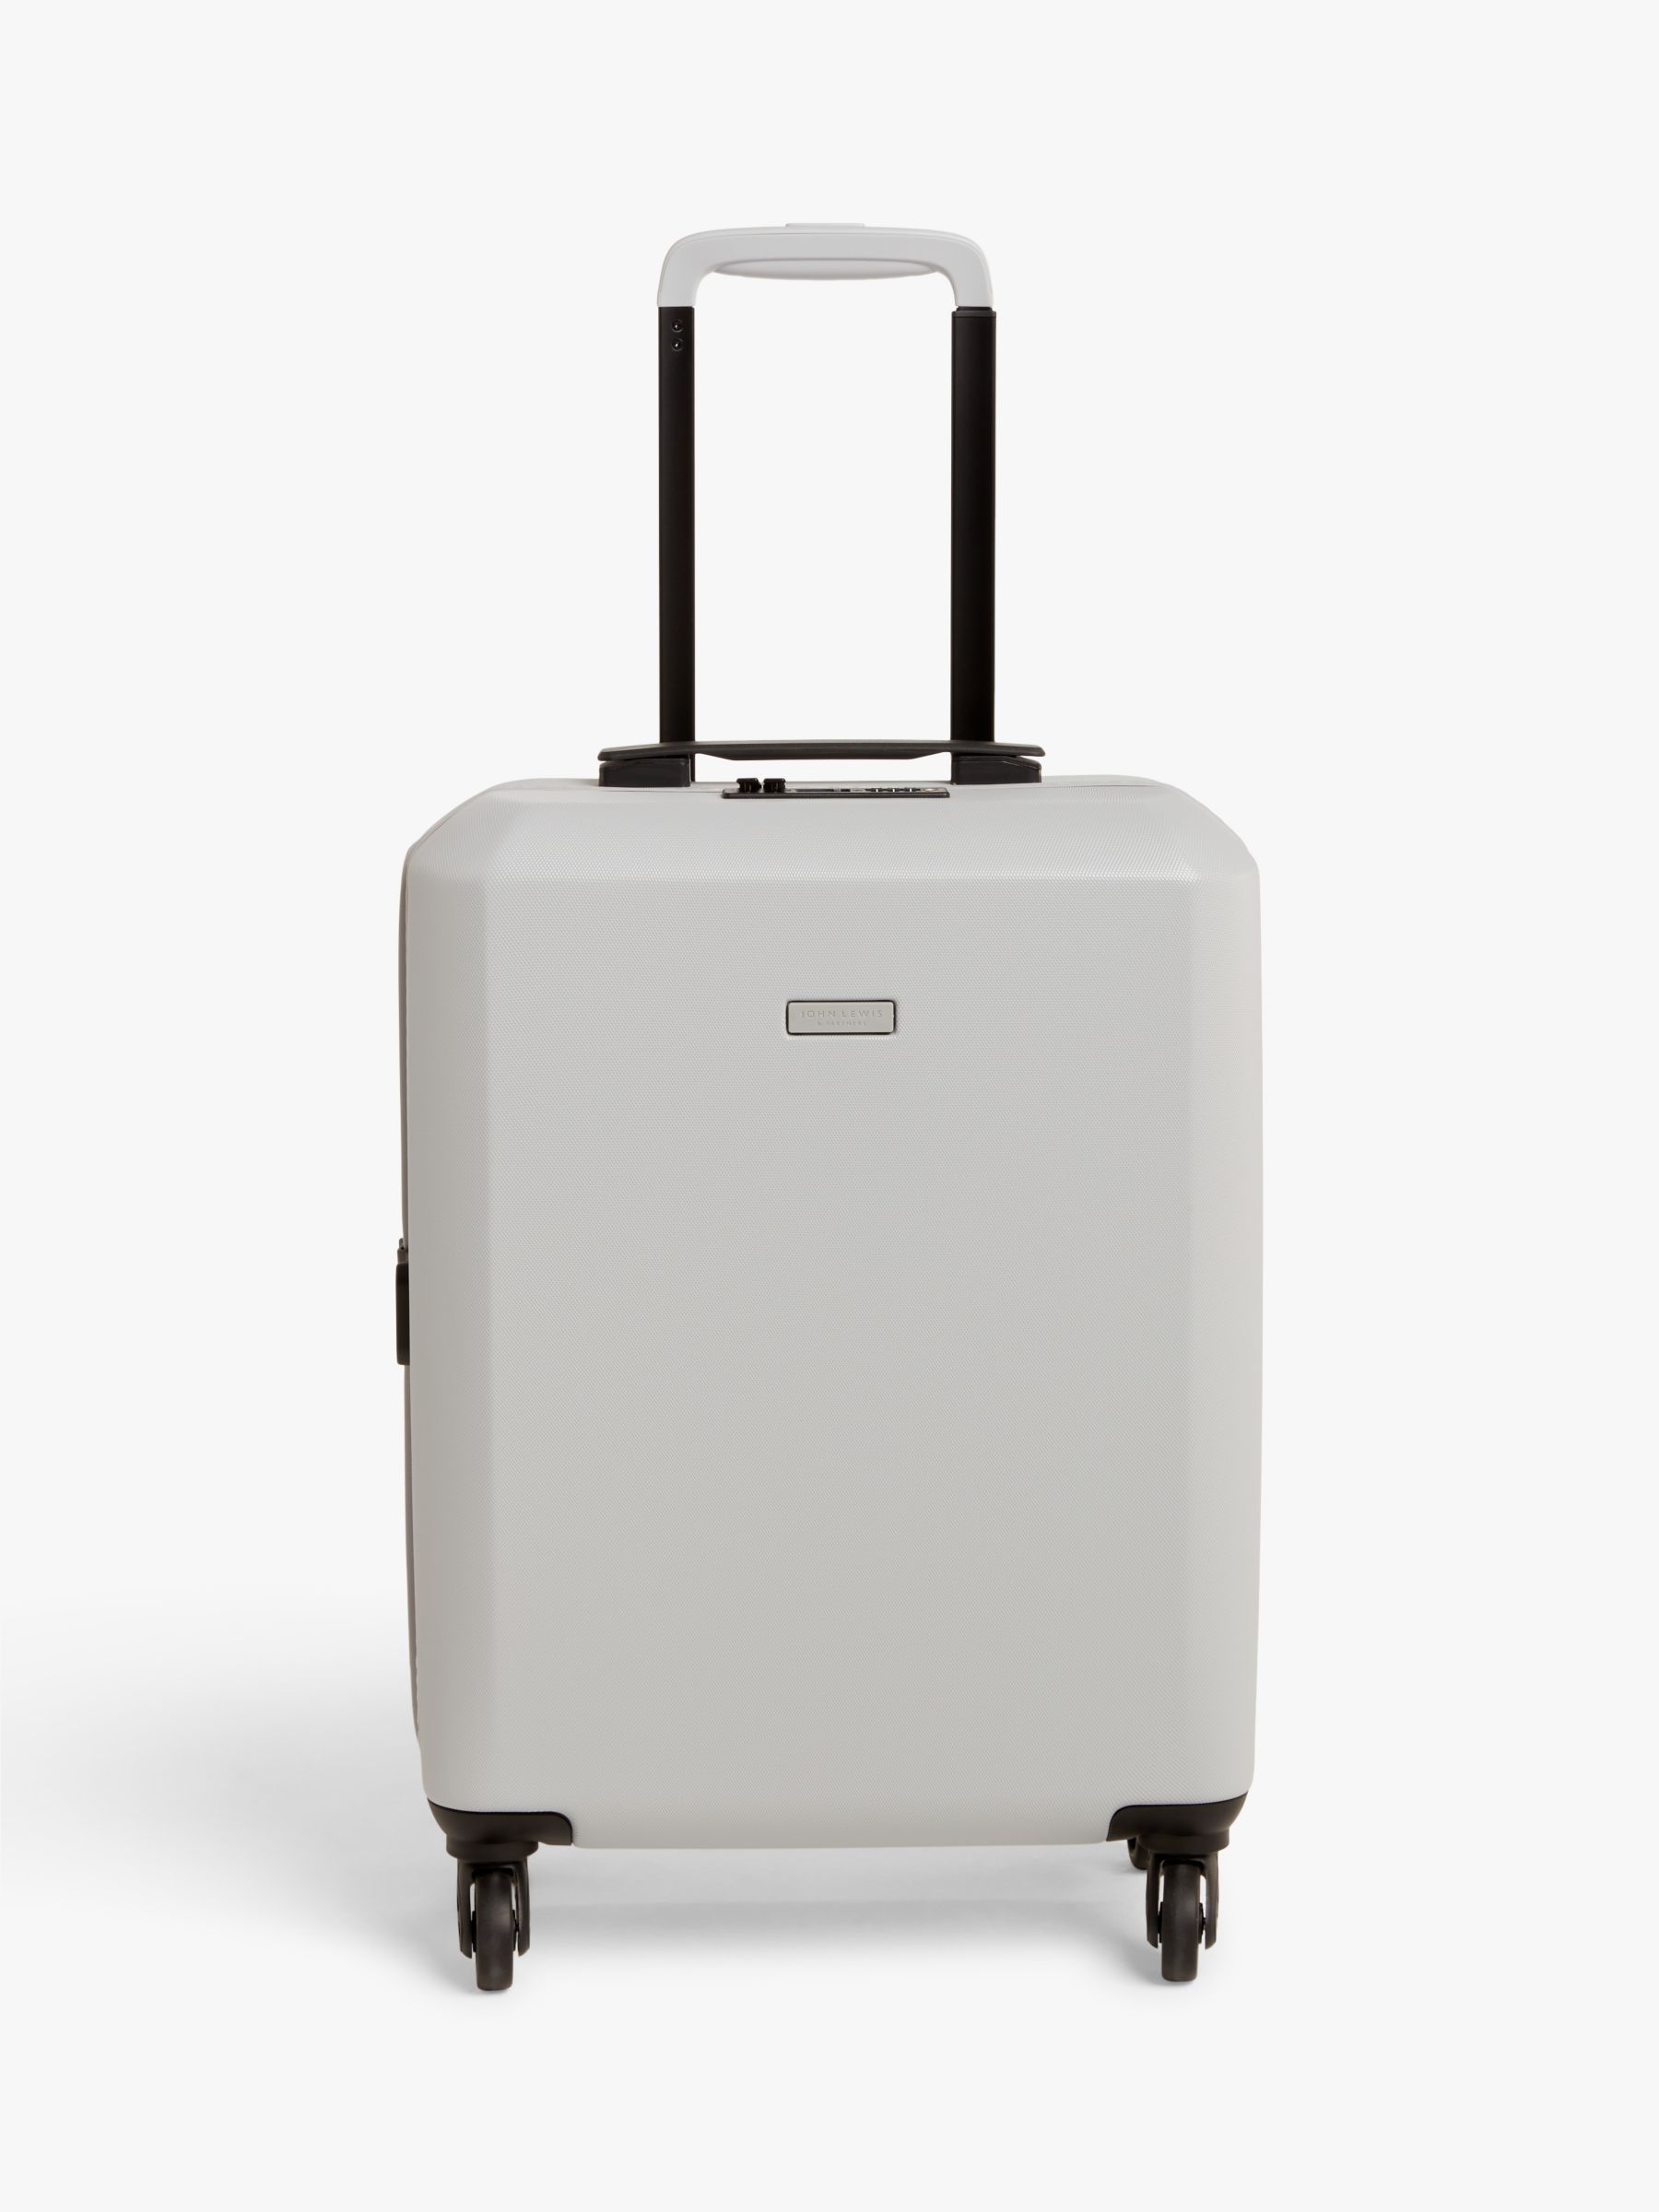 Shop all Cabin cases